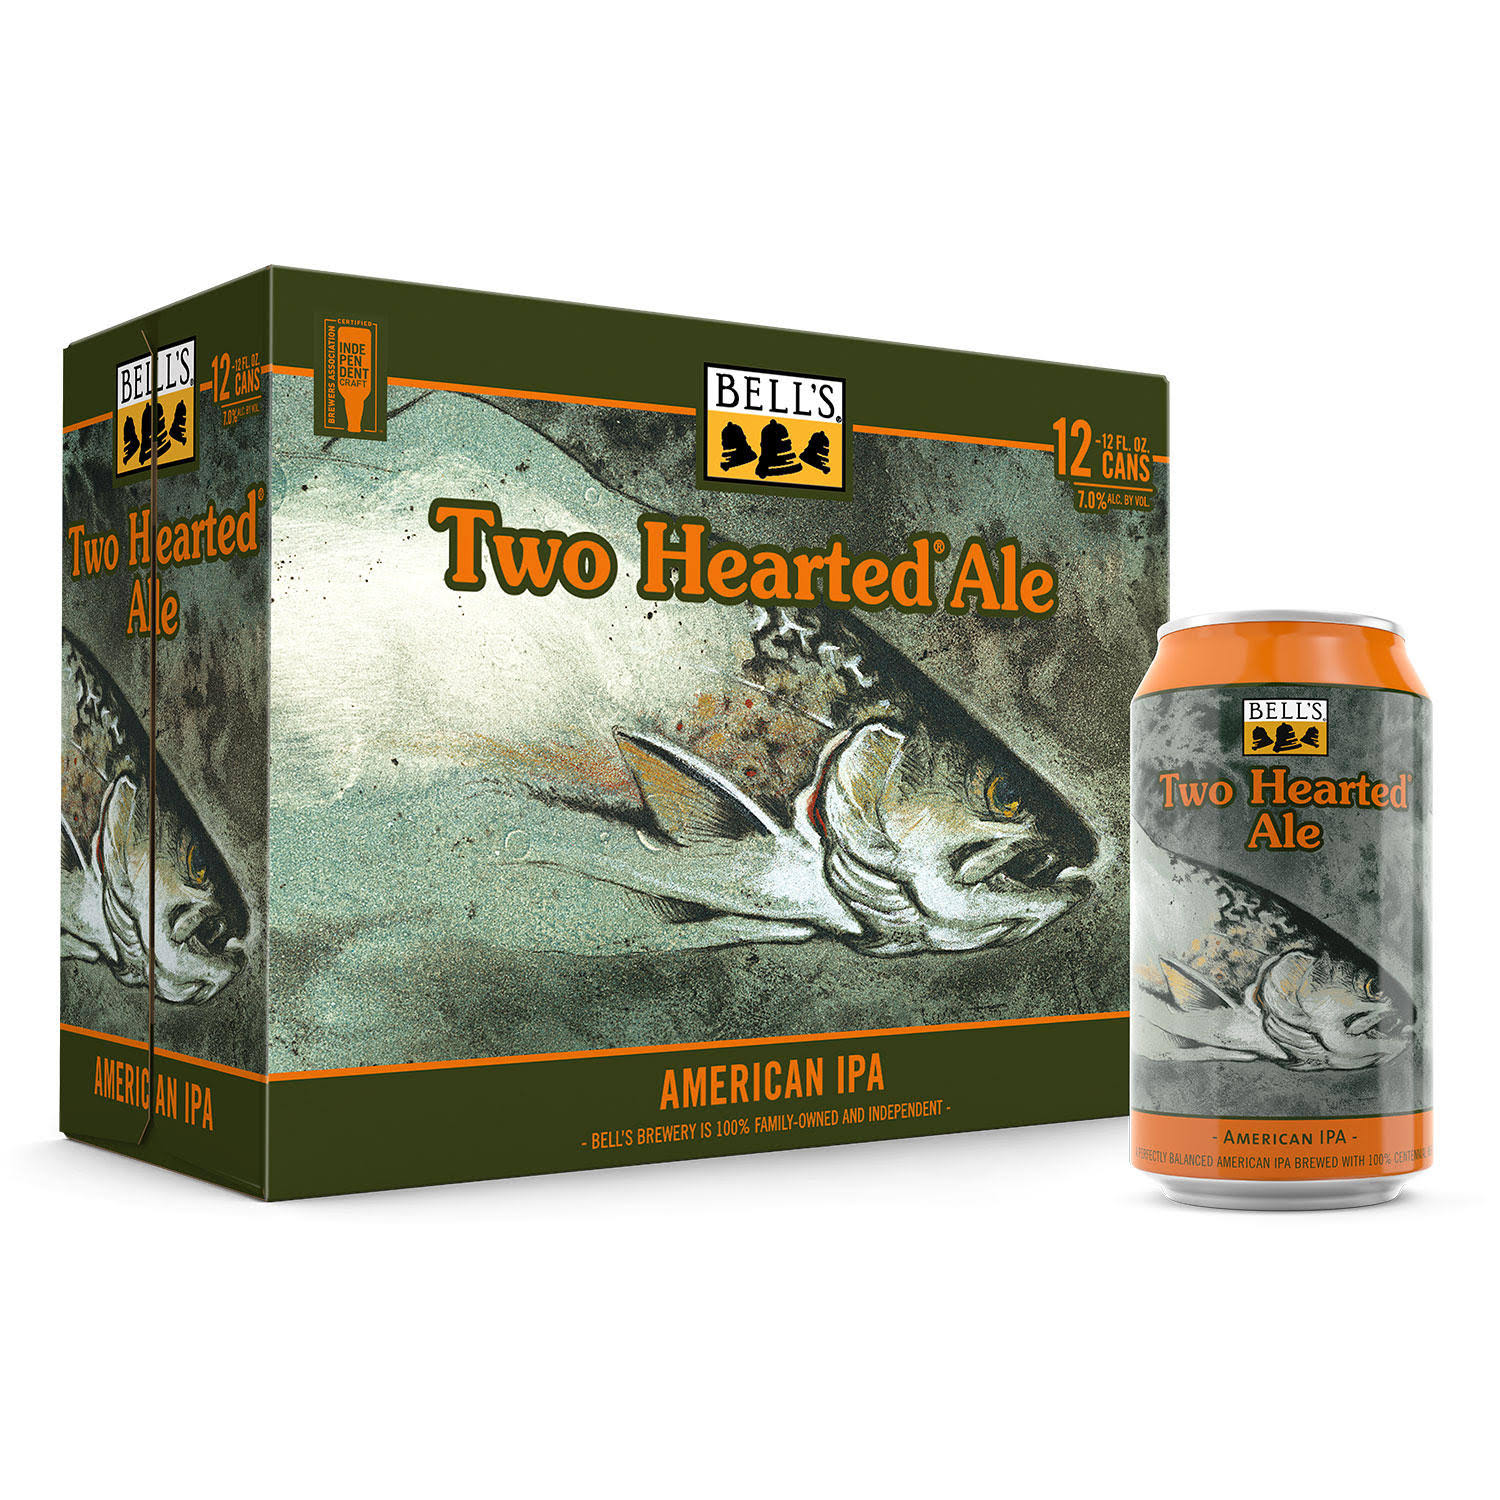 Bells Beer, American IPA, Two Hearted Ale, 12 Can Pack - 12 pack, 12 fl oz cans